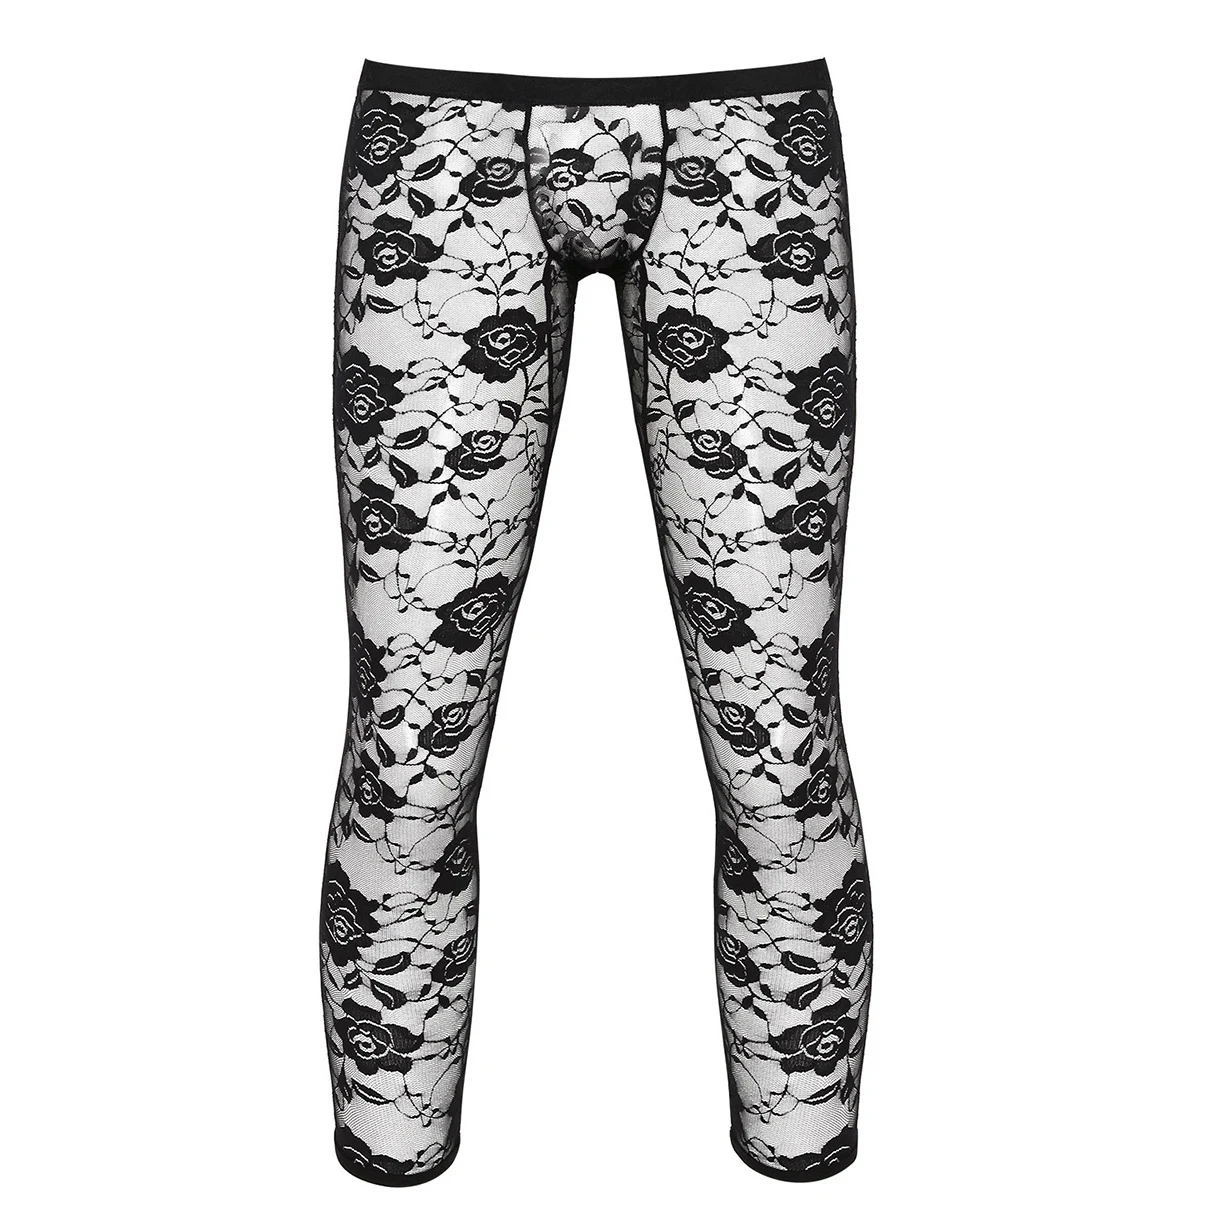 

Mens Lingerie See Through Legging Pants Low Rise Bulge Pouch Sheer Floral Lace Ankle Length Stretchy Footless Tights Trousers